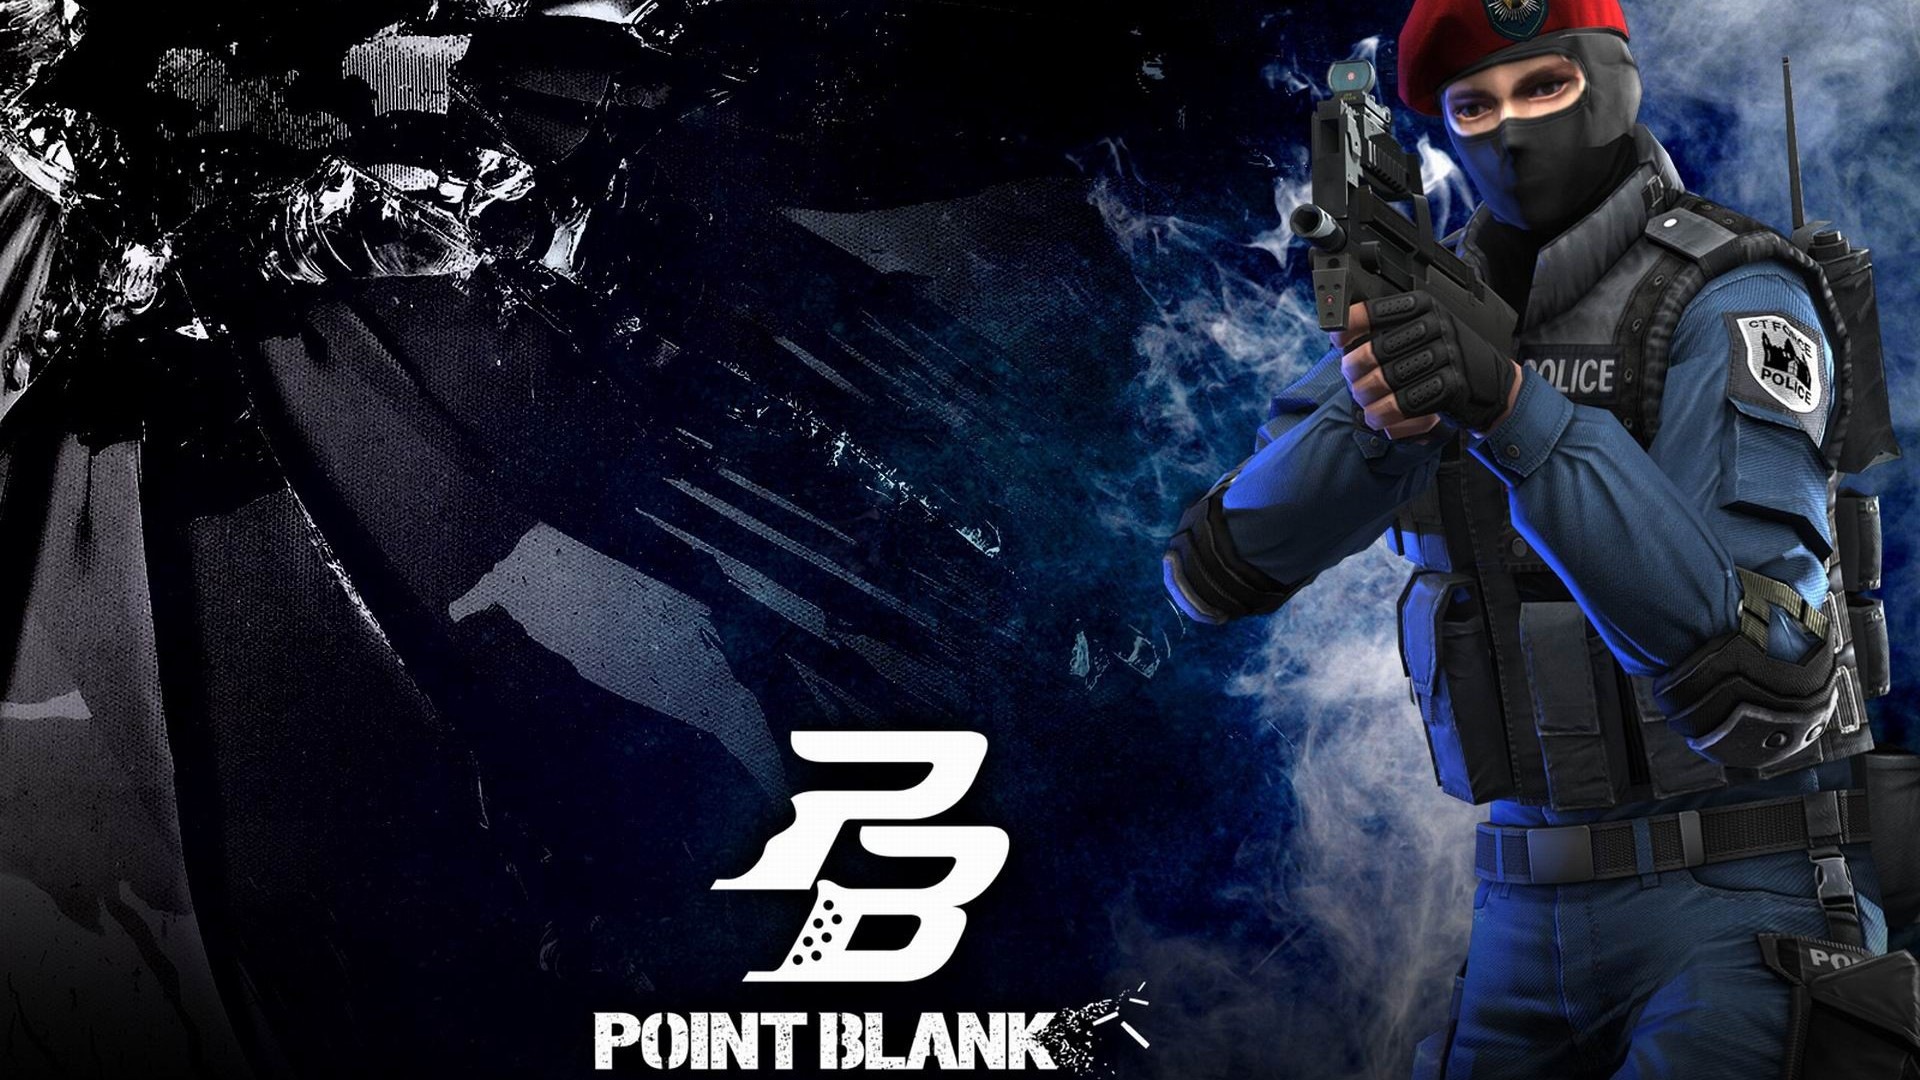 Point Blank HD game wallpapers #3 - 1920x1080